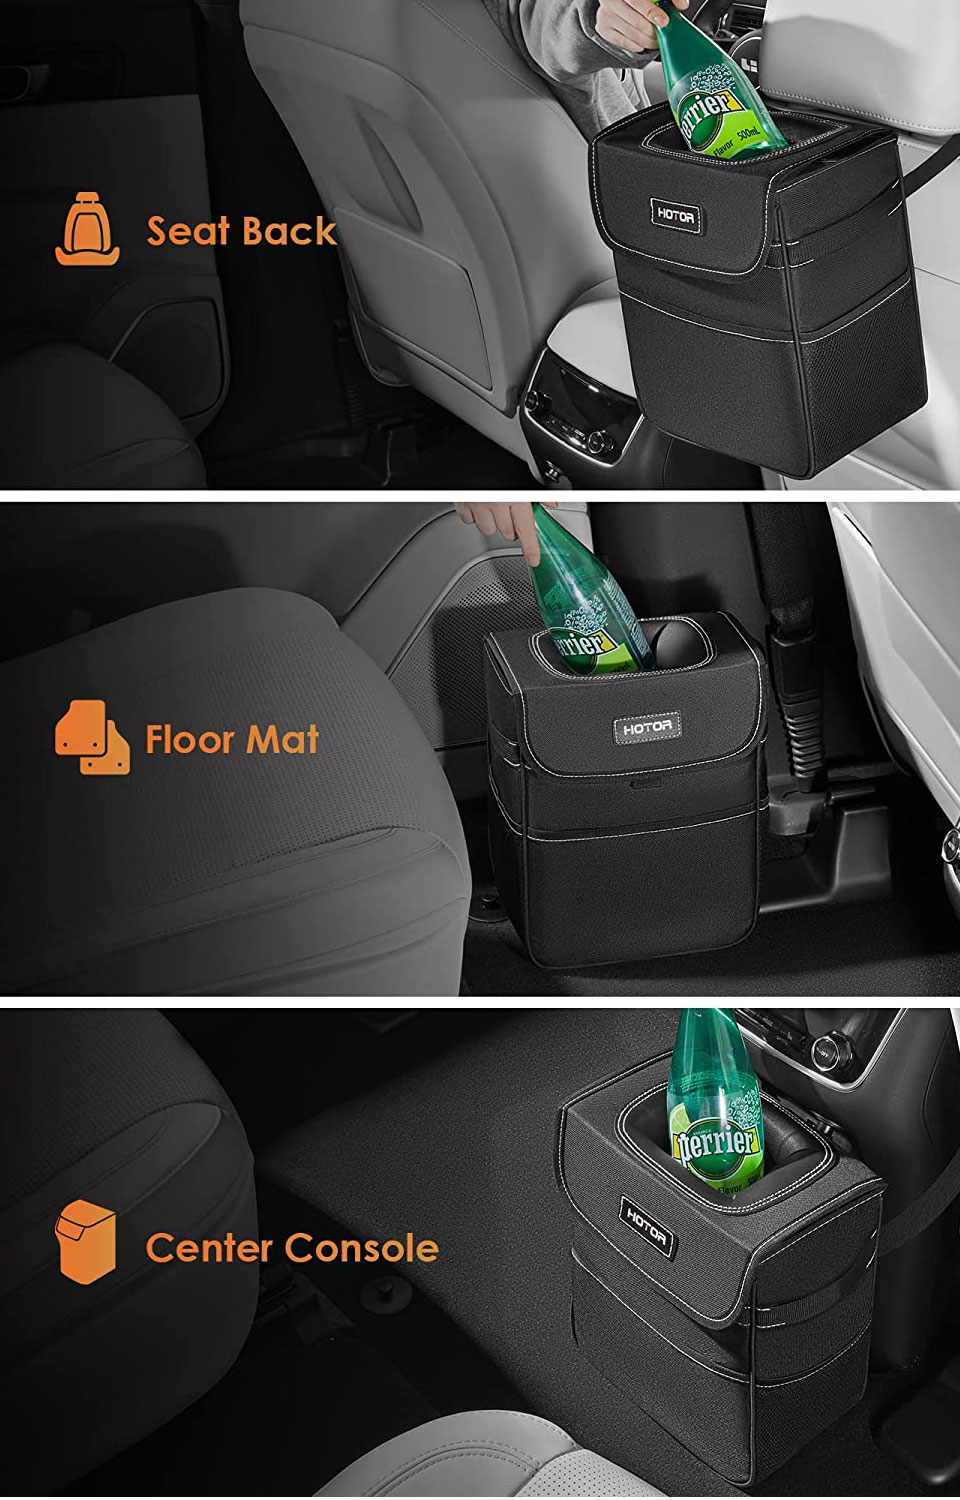 Hotor Car Trash Can with Lid and Storage Pockets